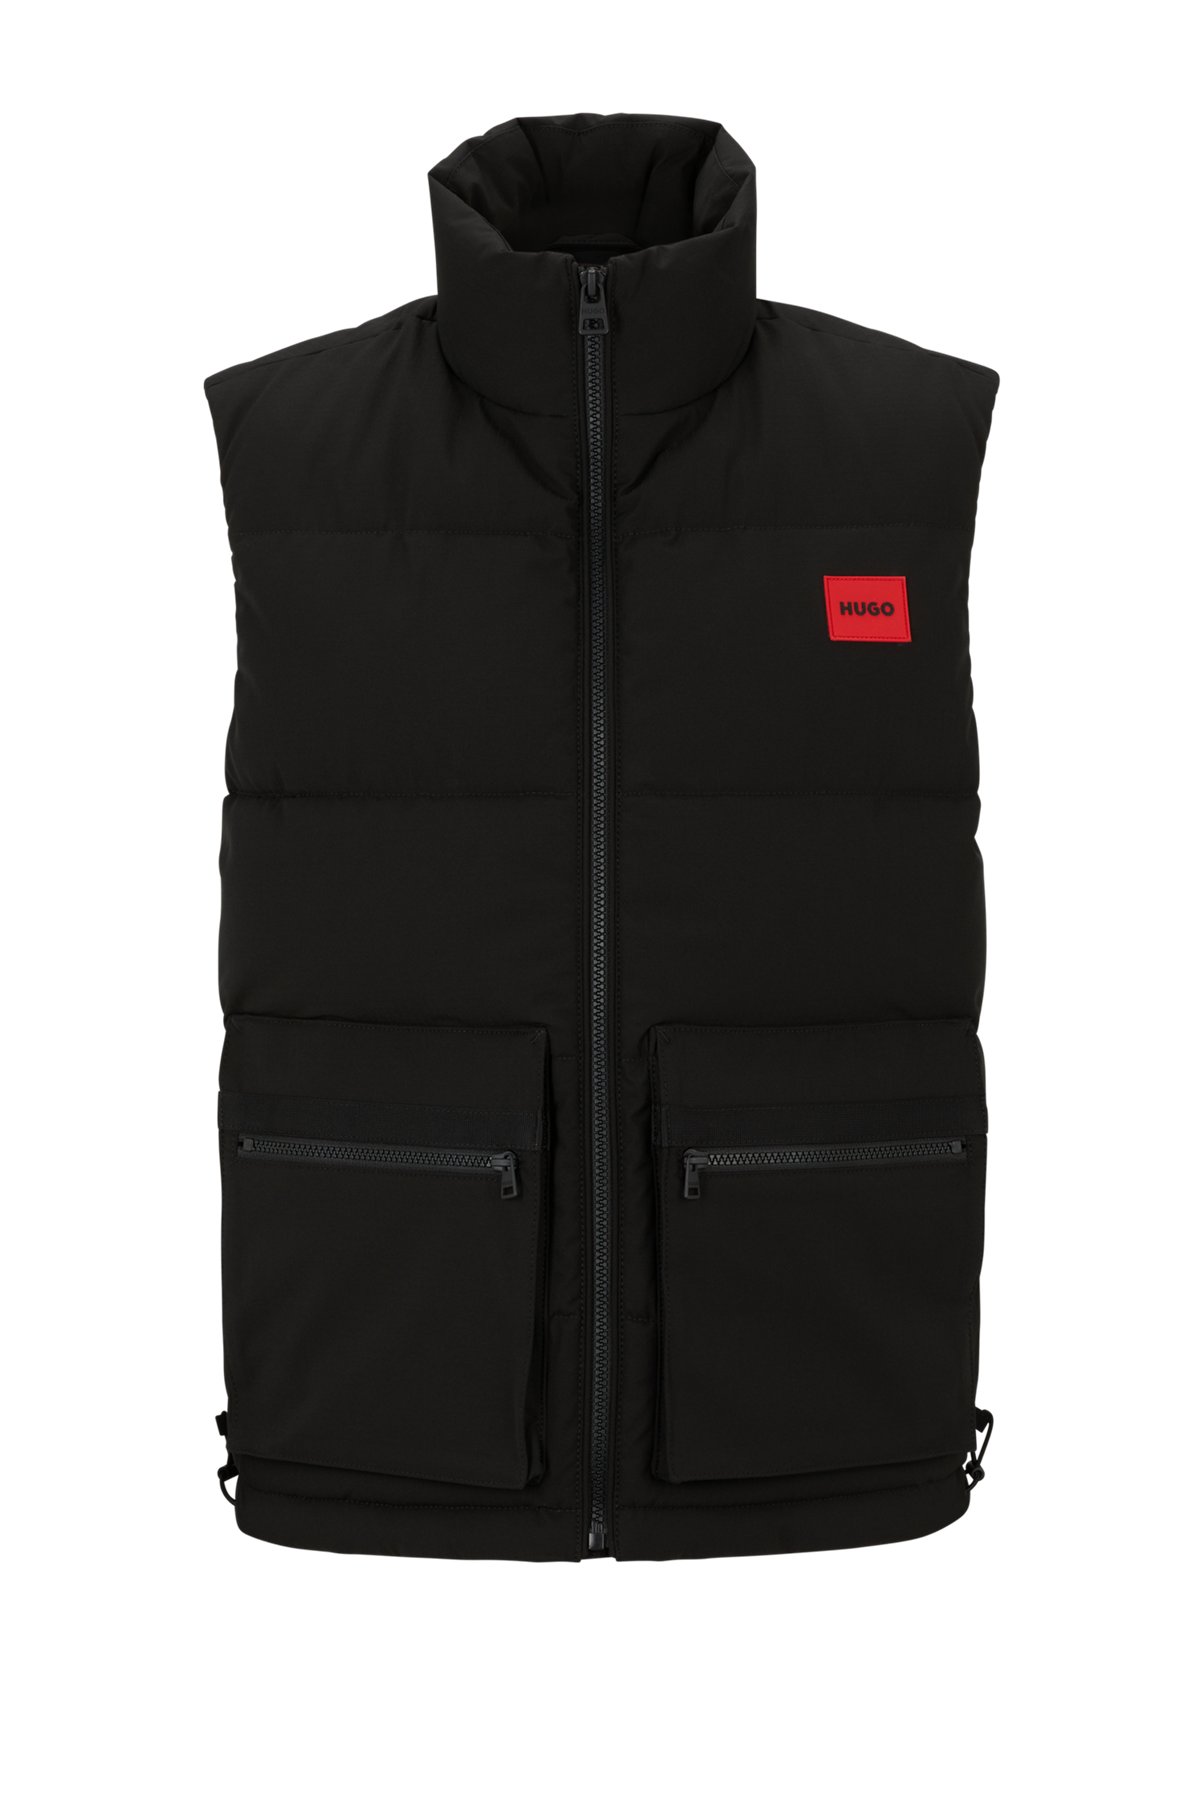 HUGO - Water-repellent gilet with red logo badge